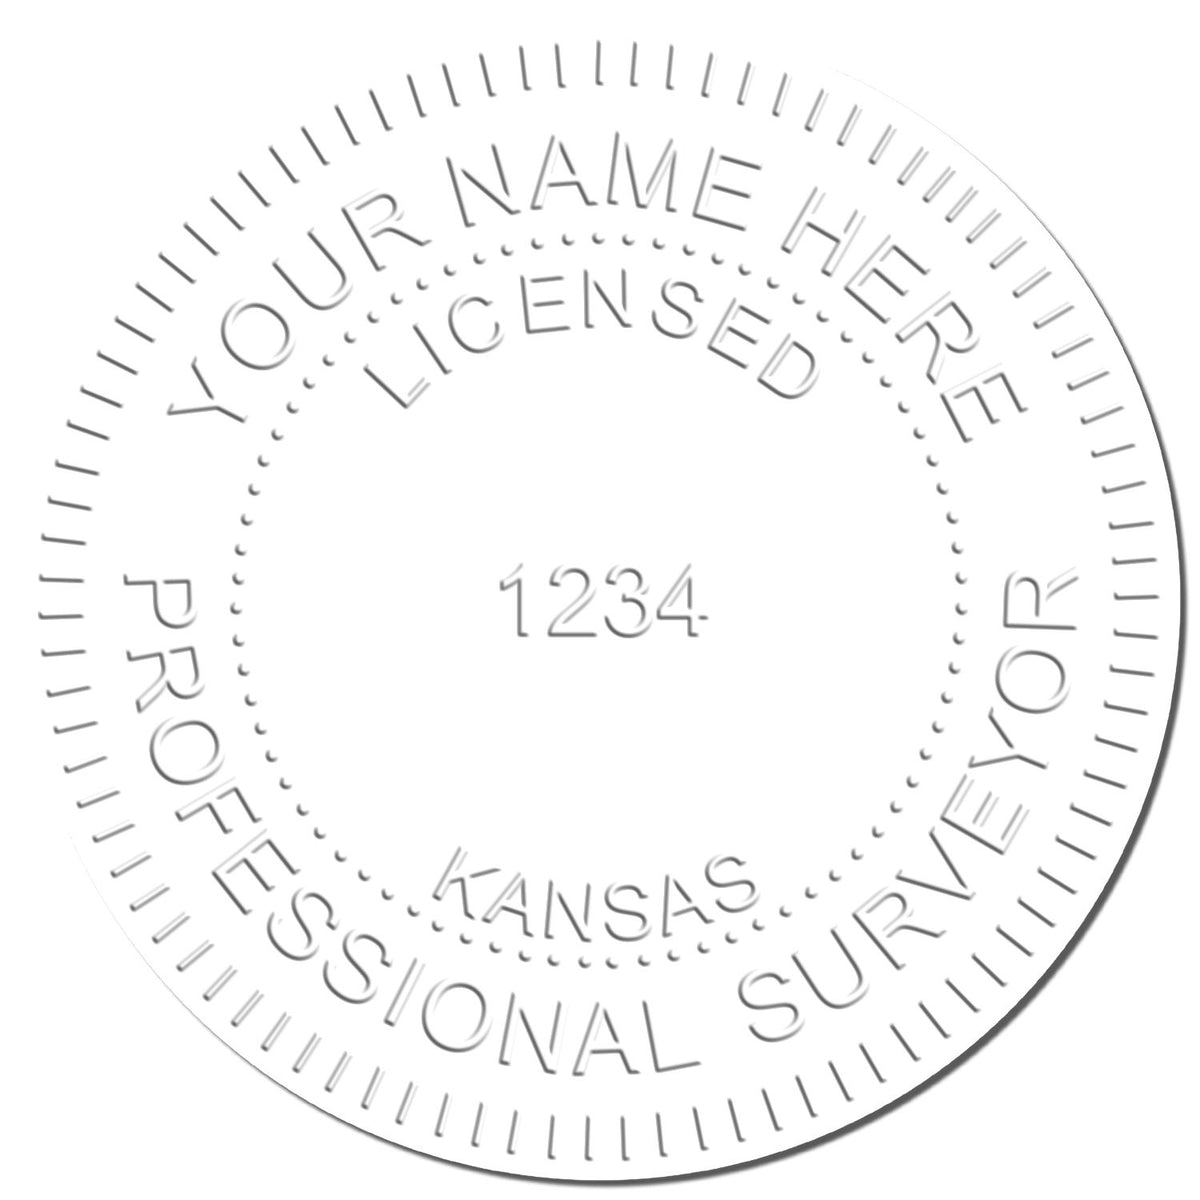 This paper is stamped with a sample imprint of the Hybrid Kansas Land Surveyor Seal, signifying its quality and reliability.